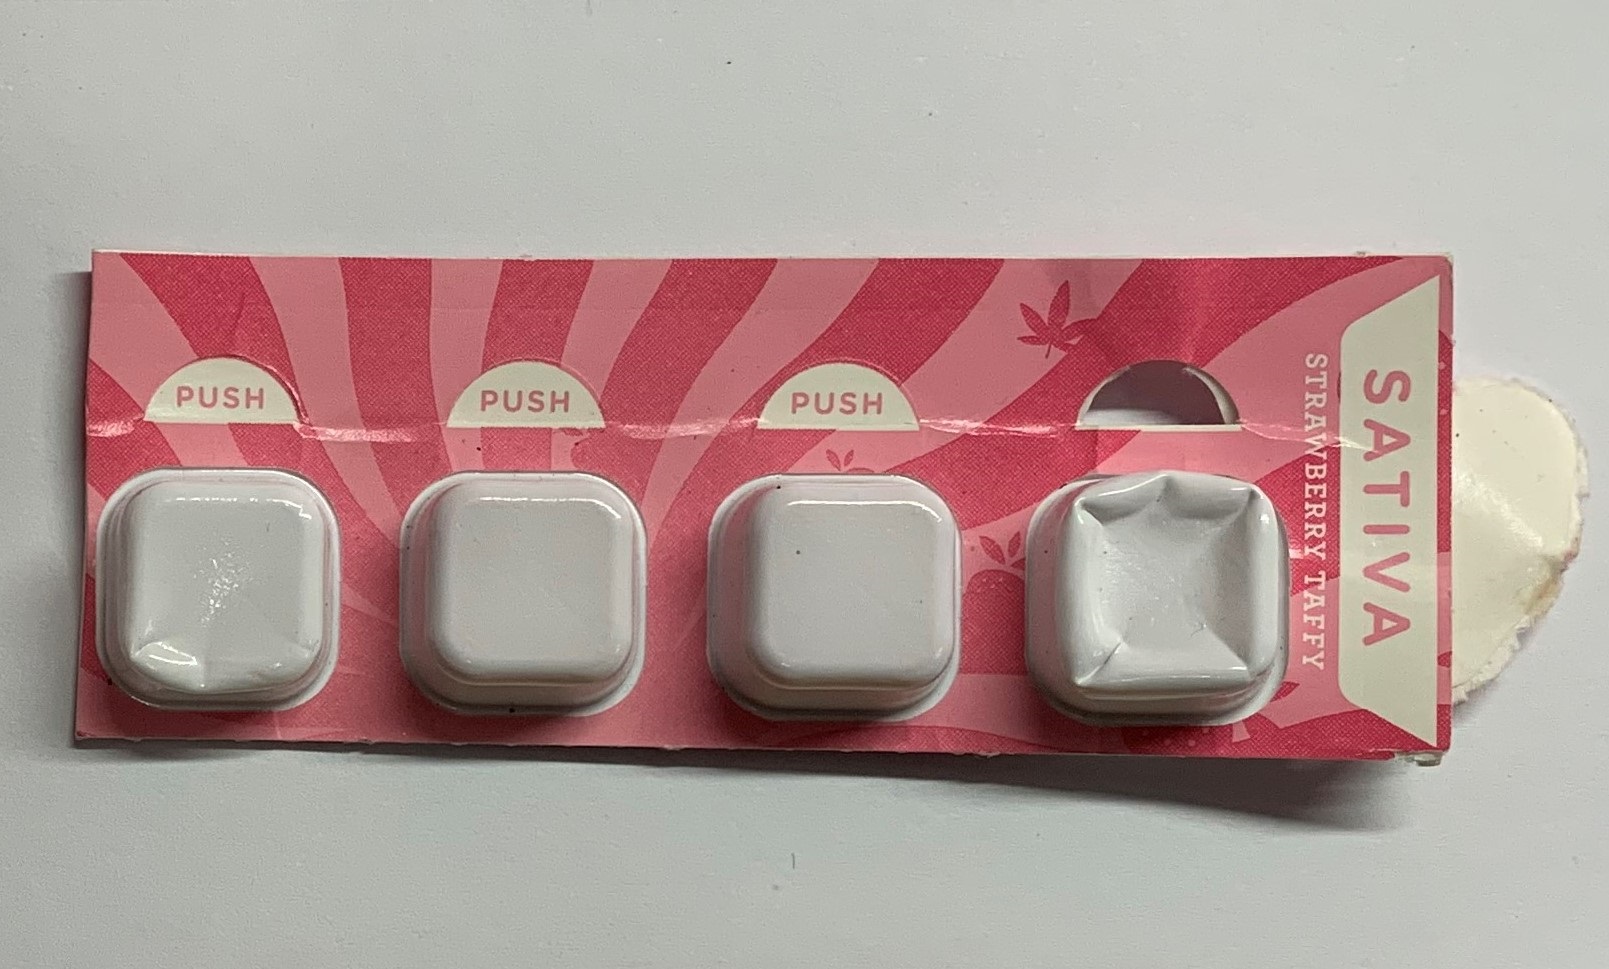 Photo 1 & 2 (CNB): Chocolate and strawberry taffies, believed to be infused with cannabis, found in CNB raid at Choa Chu Kang Loop, on 23 October 2019.